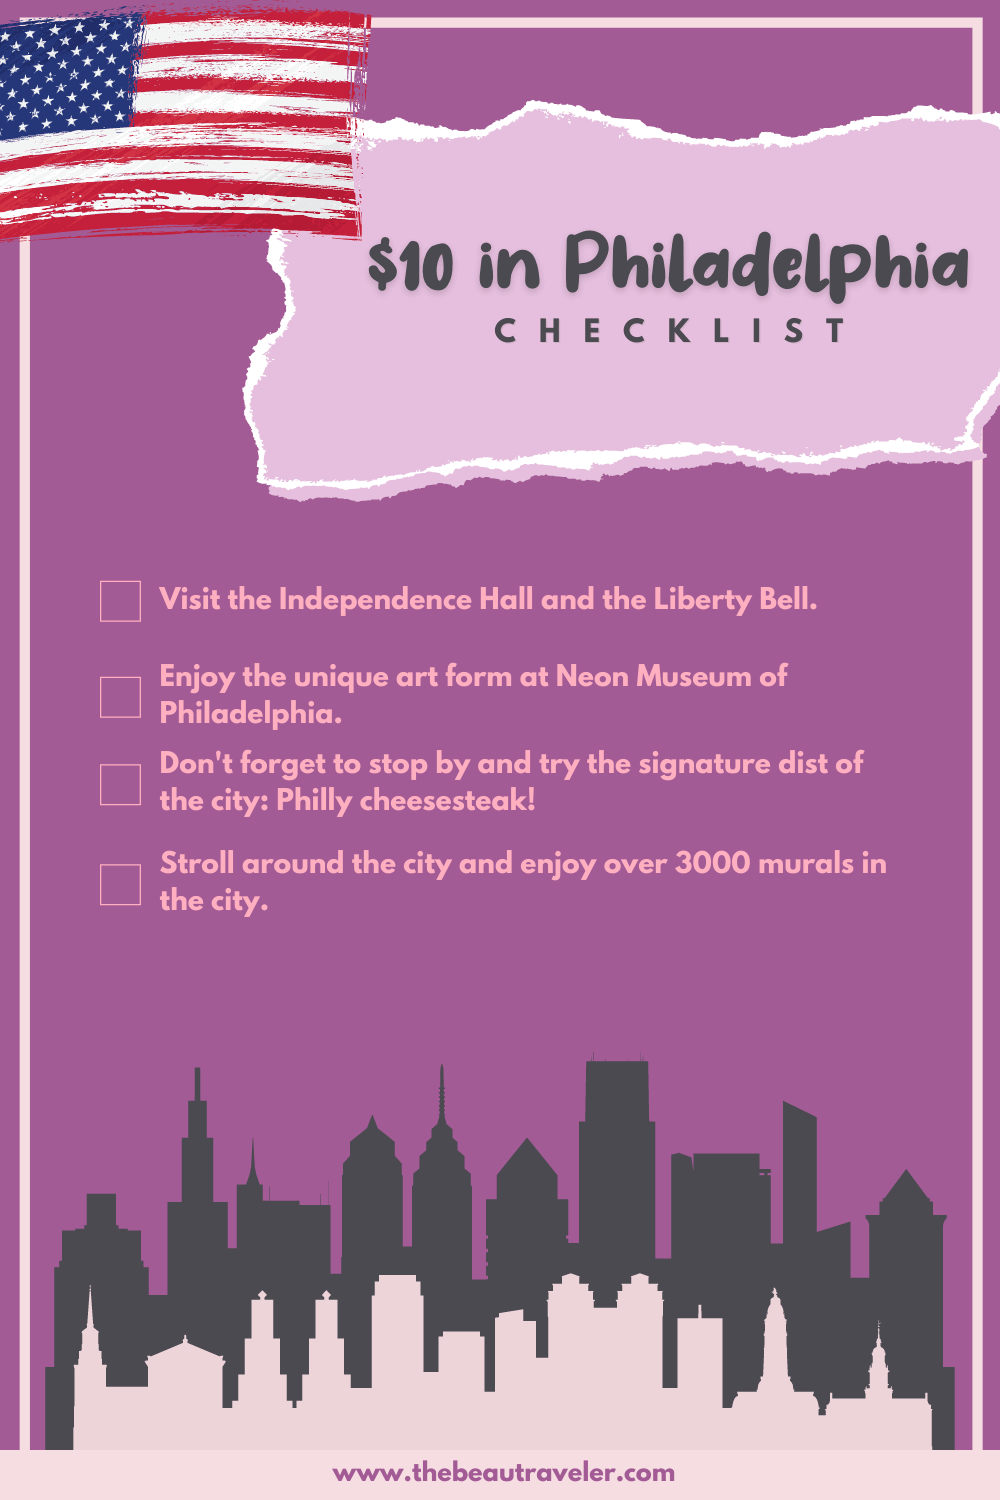 What You Could Get in Philadelphia for $10 - The BeauTraveler